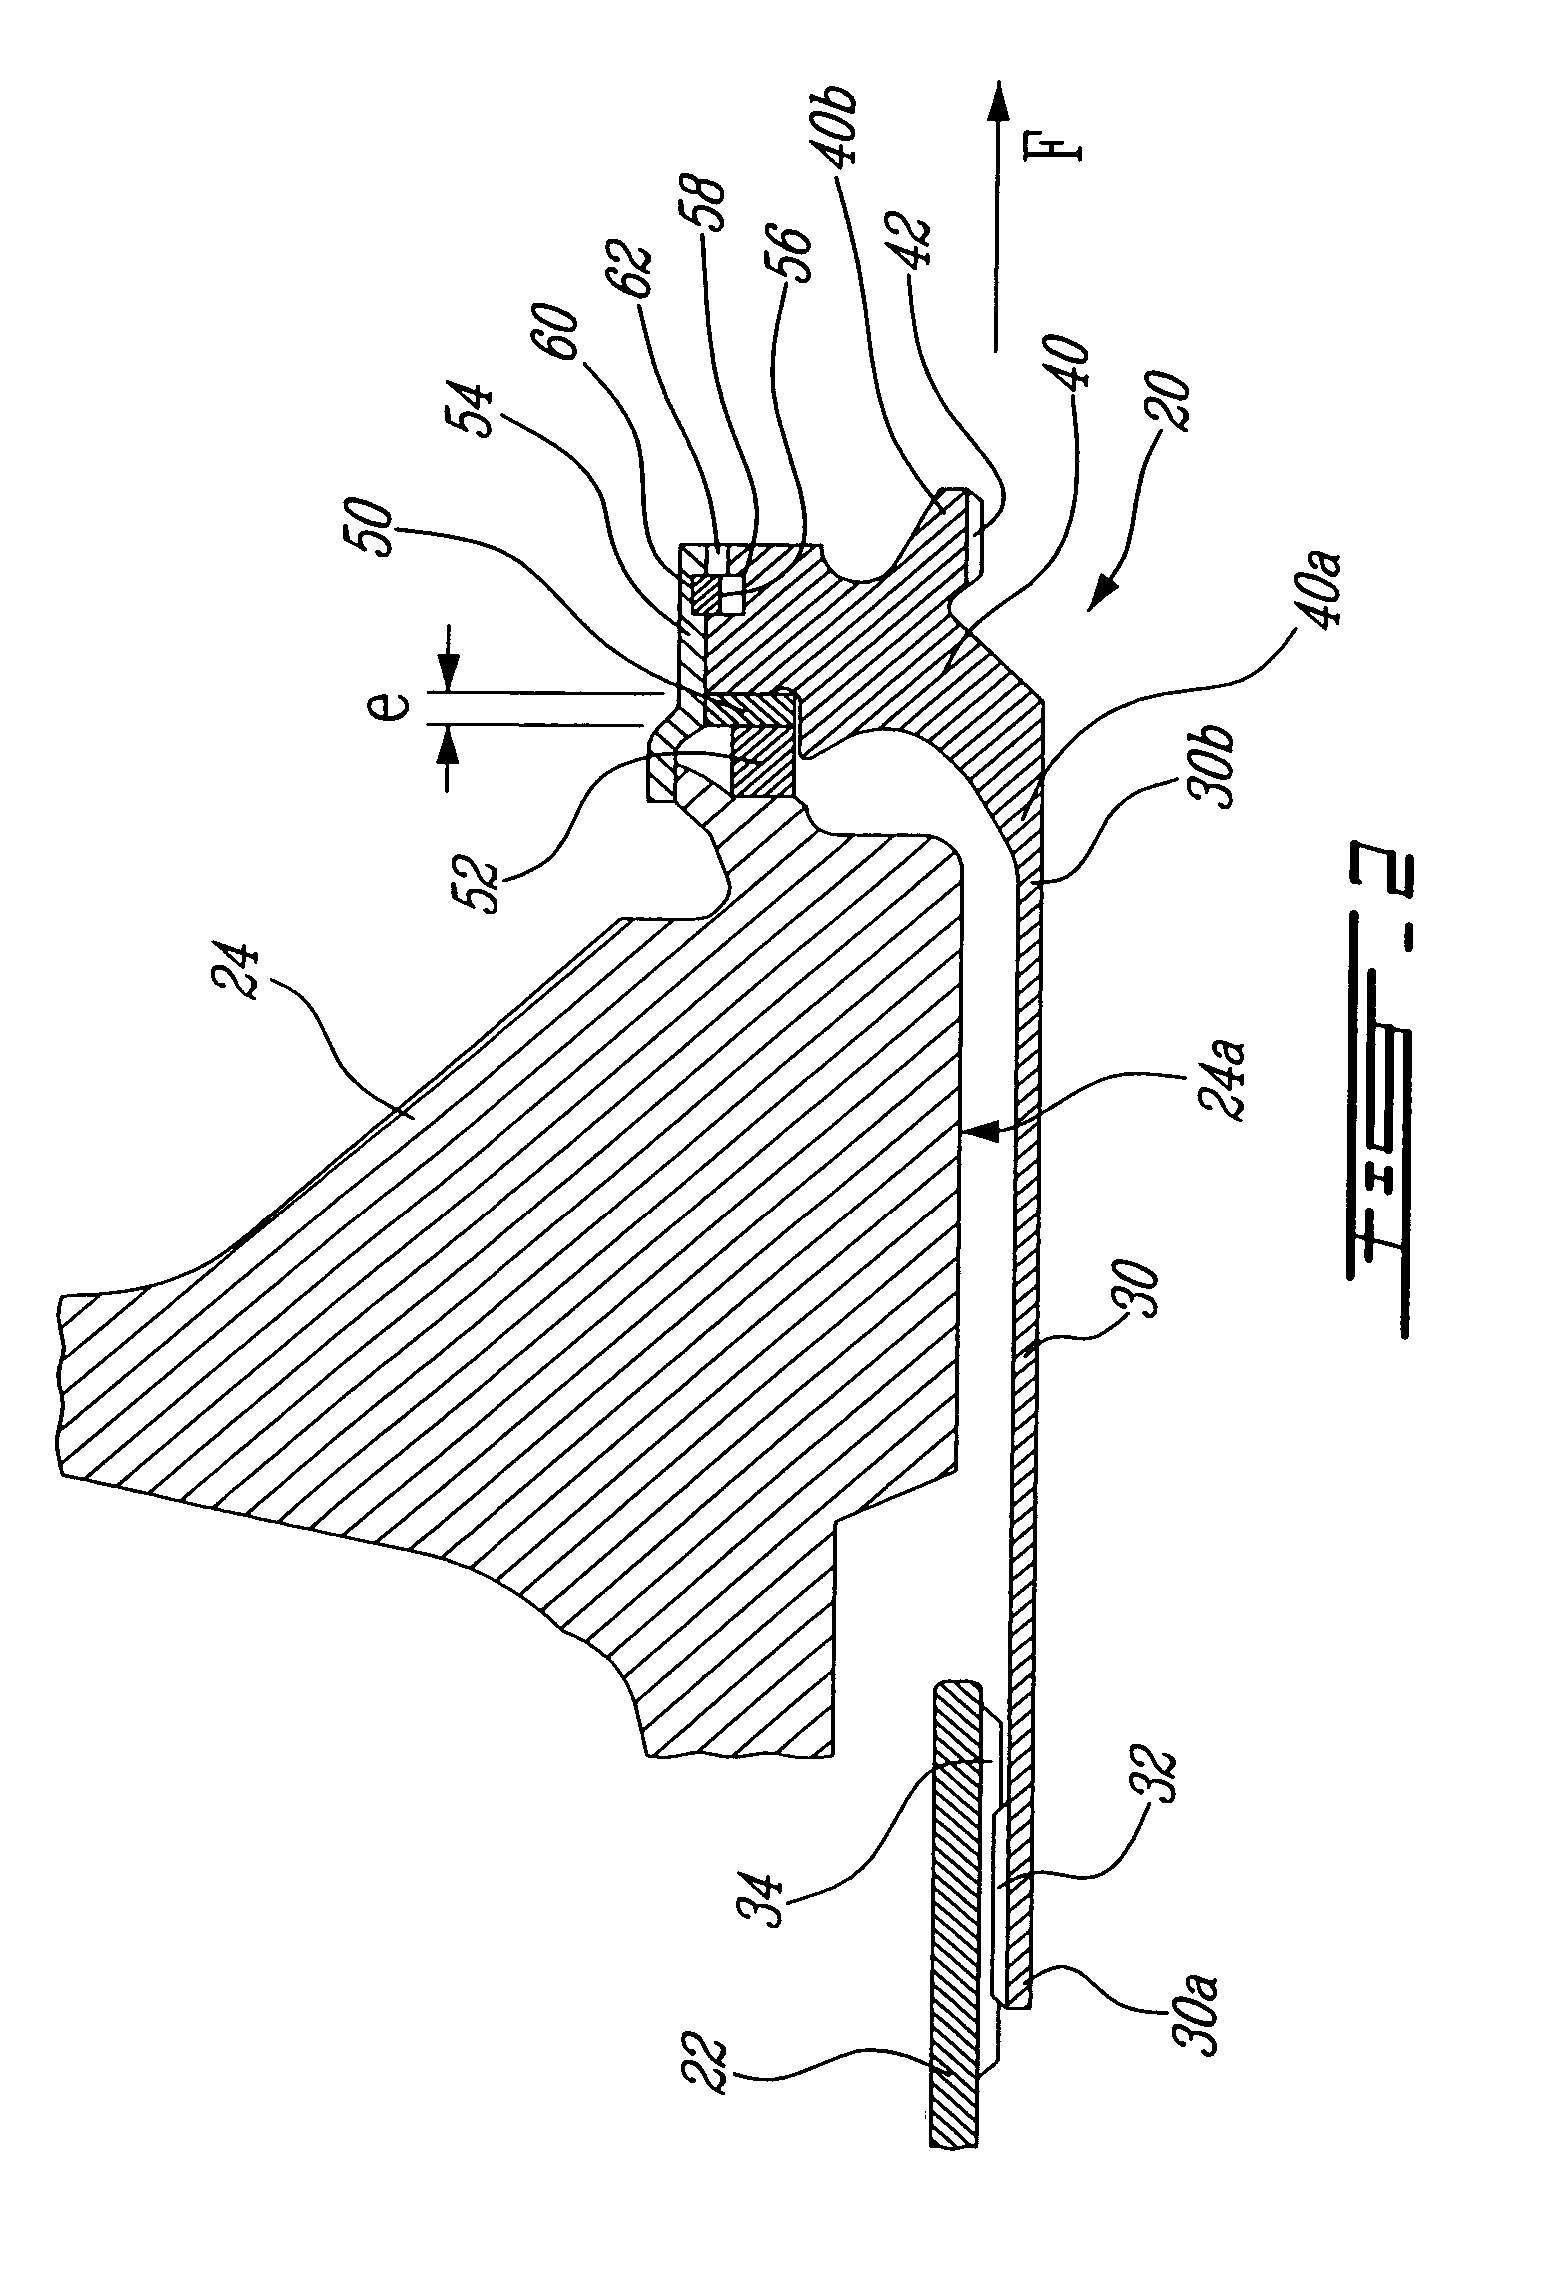 Pre-stretched tie-bolt for use in a gas turbine engine and method